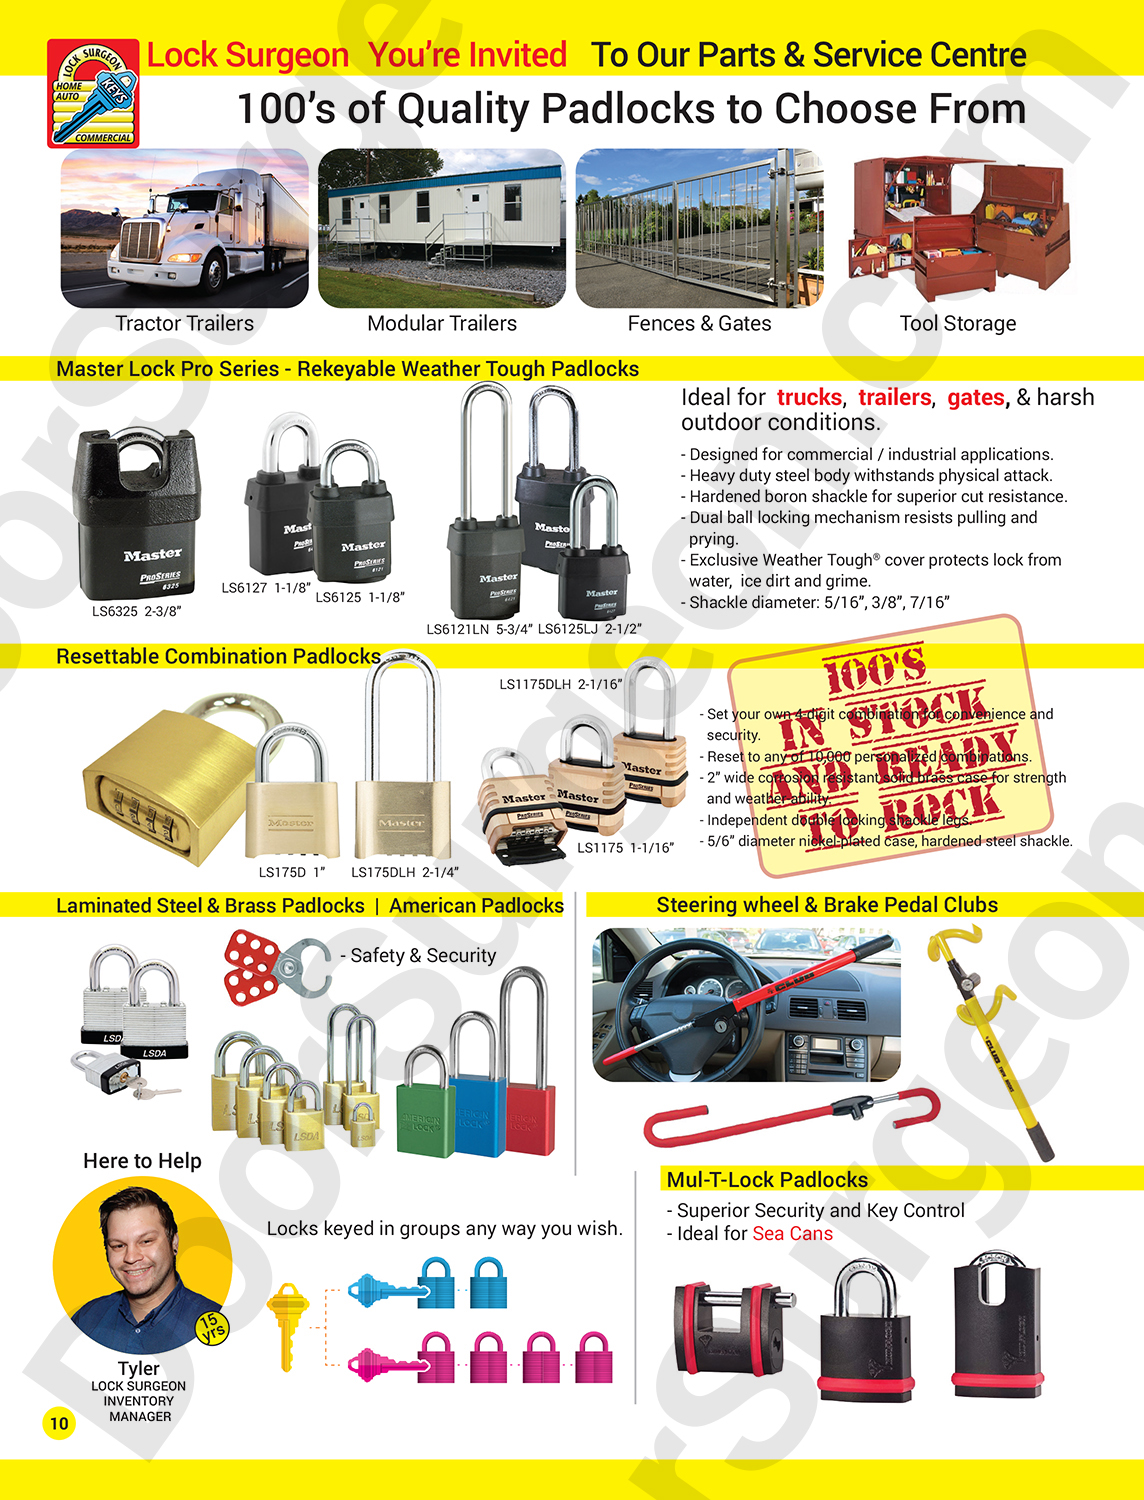 Master lock and American lock high security heavy duty padlocks for commercial and industrial use.